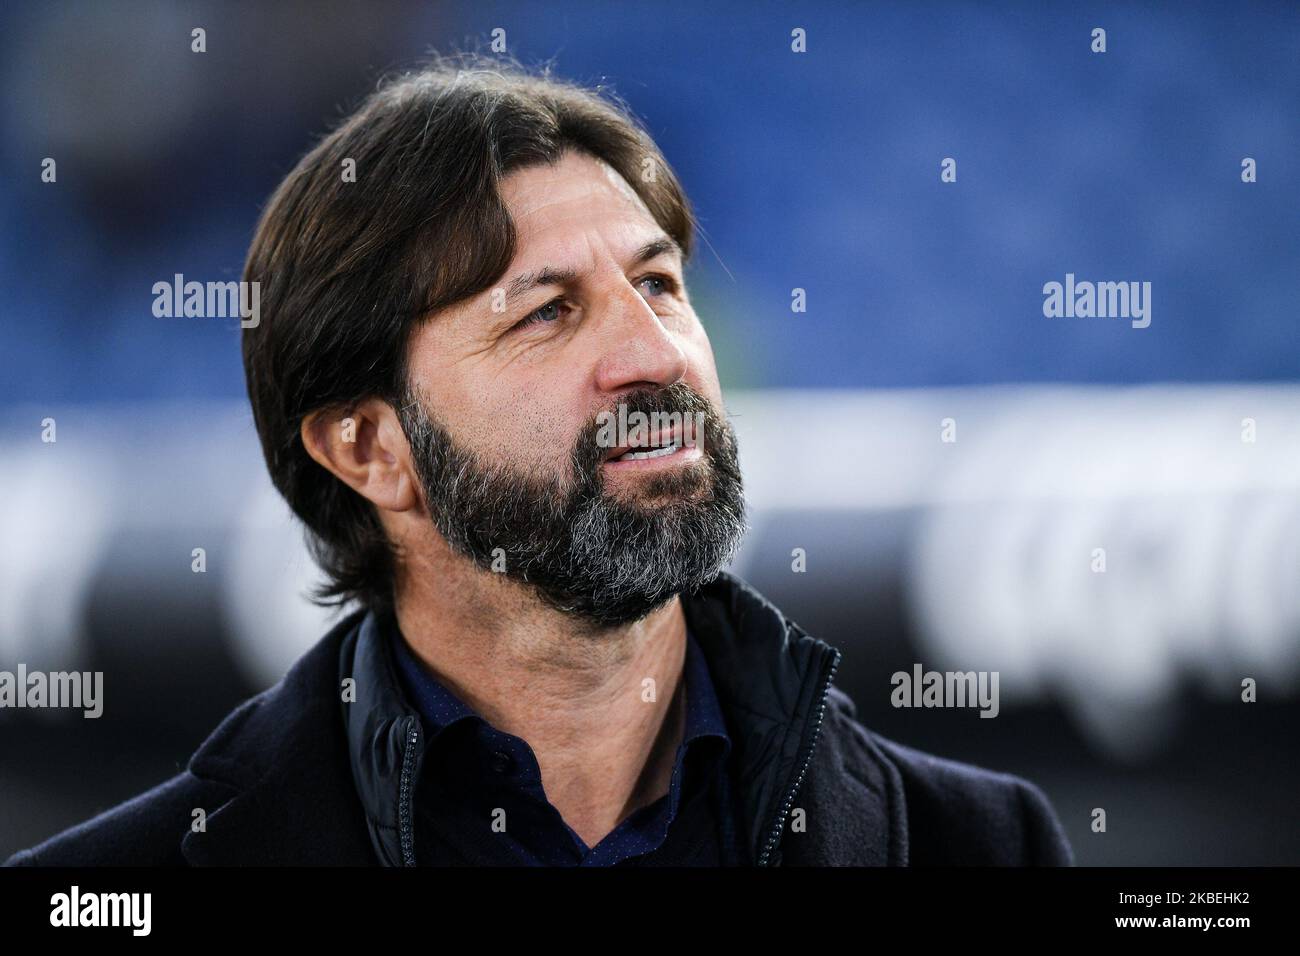 Massimo Rastelli manager of Cremonese during the Italian Cup match between Lazio and Cremonese at Stadio Olimpico, Rome, Italy on 14 January 2020. (Photo by Giuseppe Maffia/NurPhoto) Stock Photo